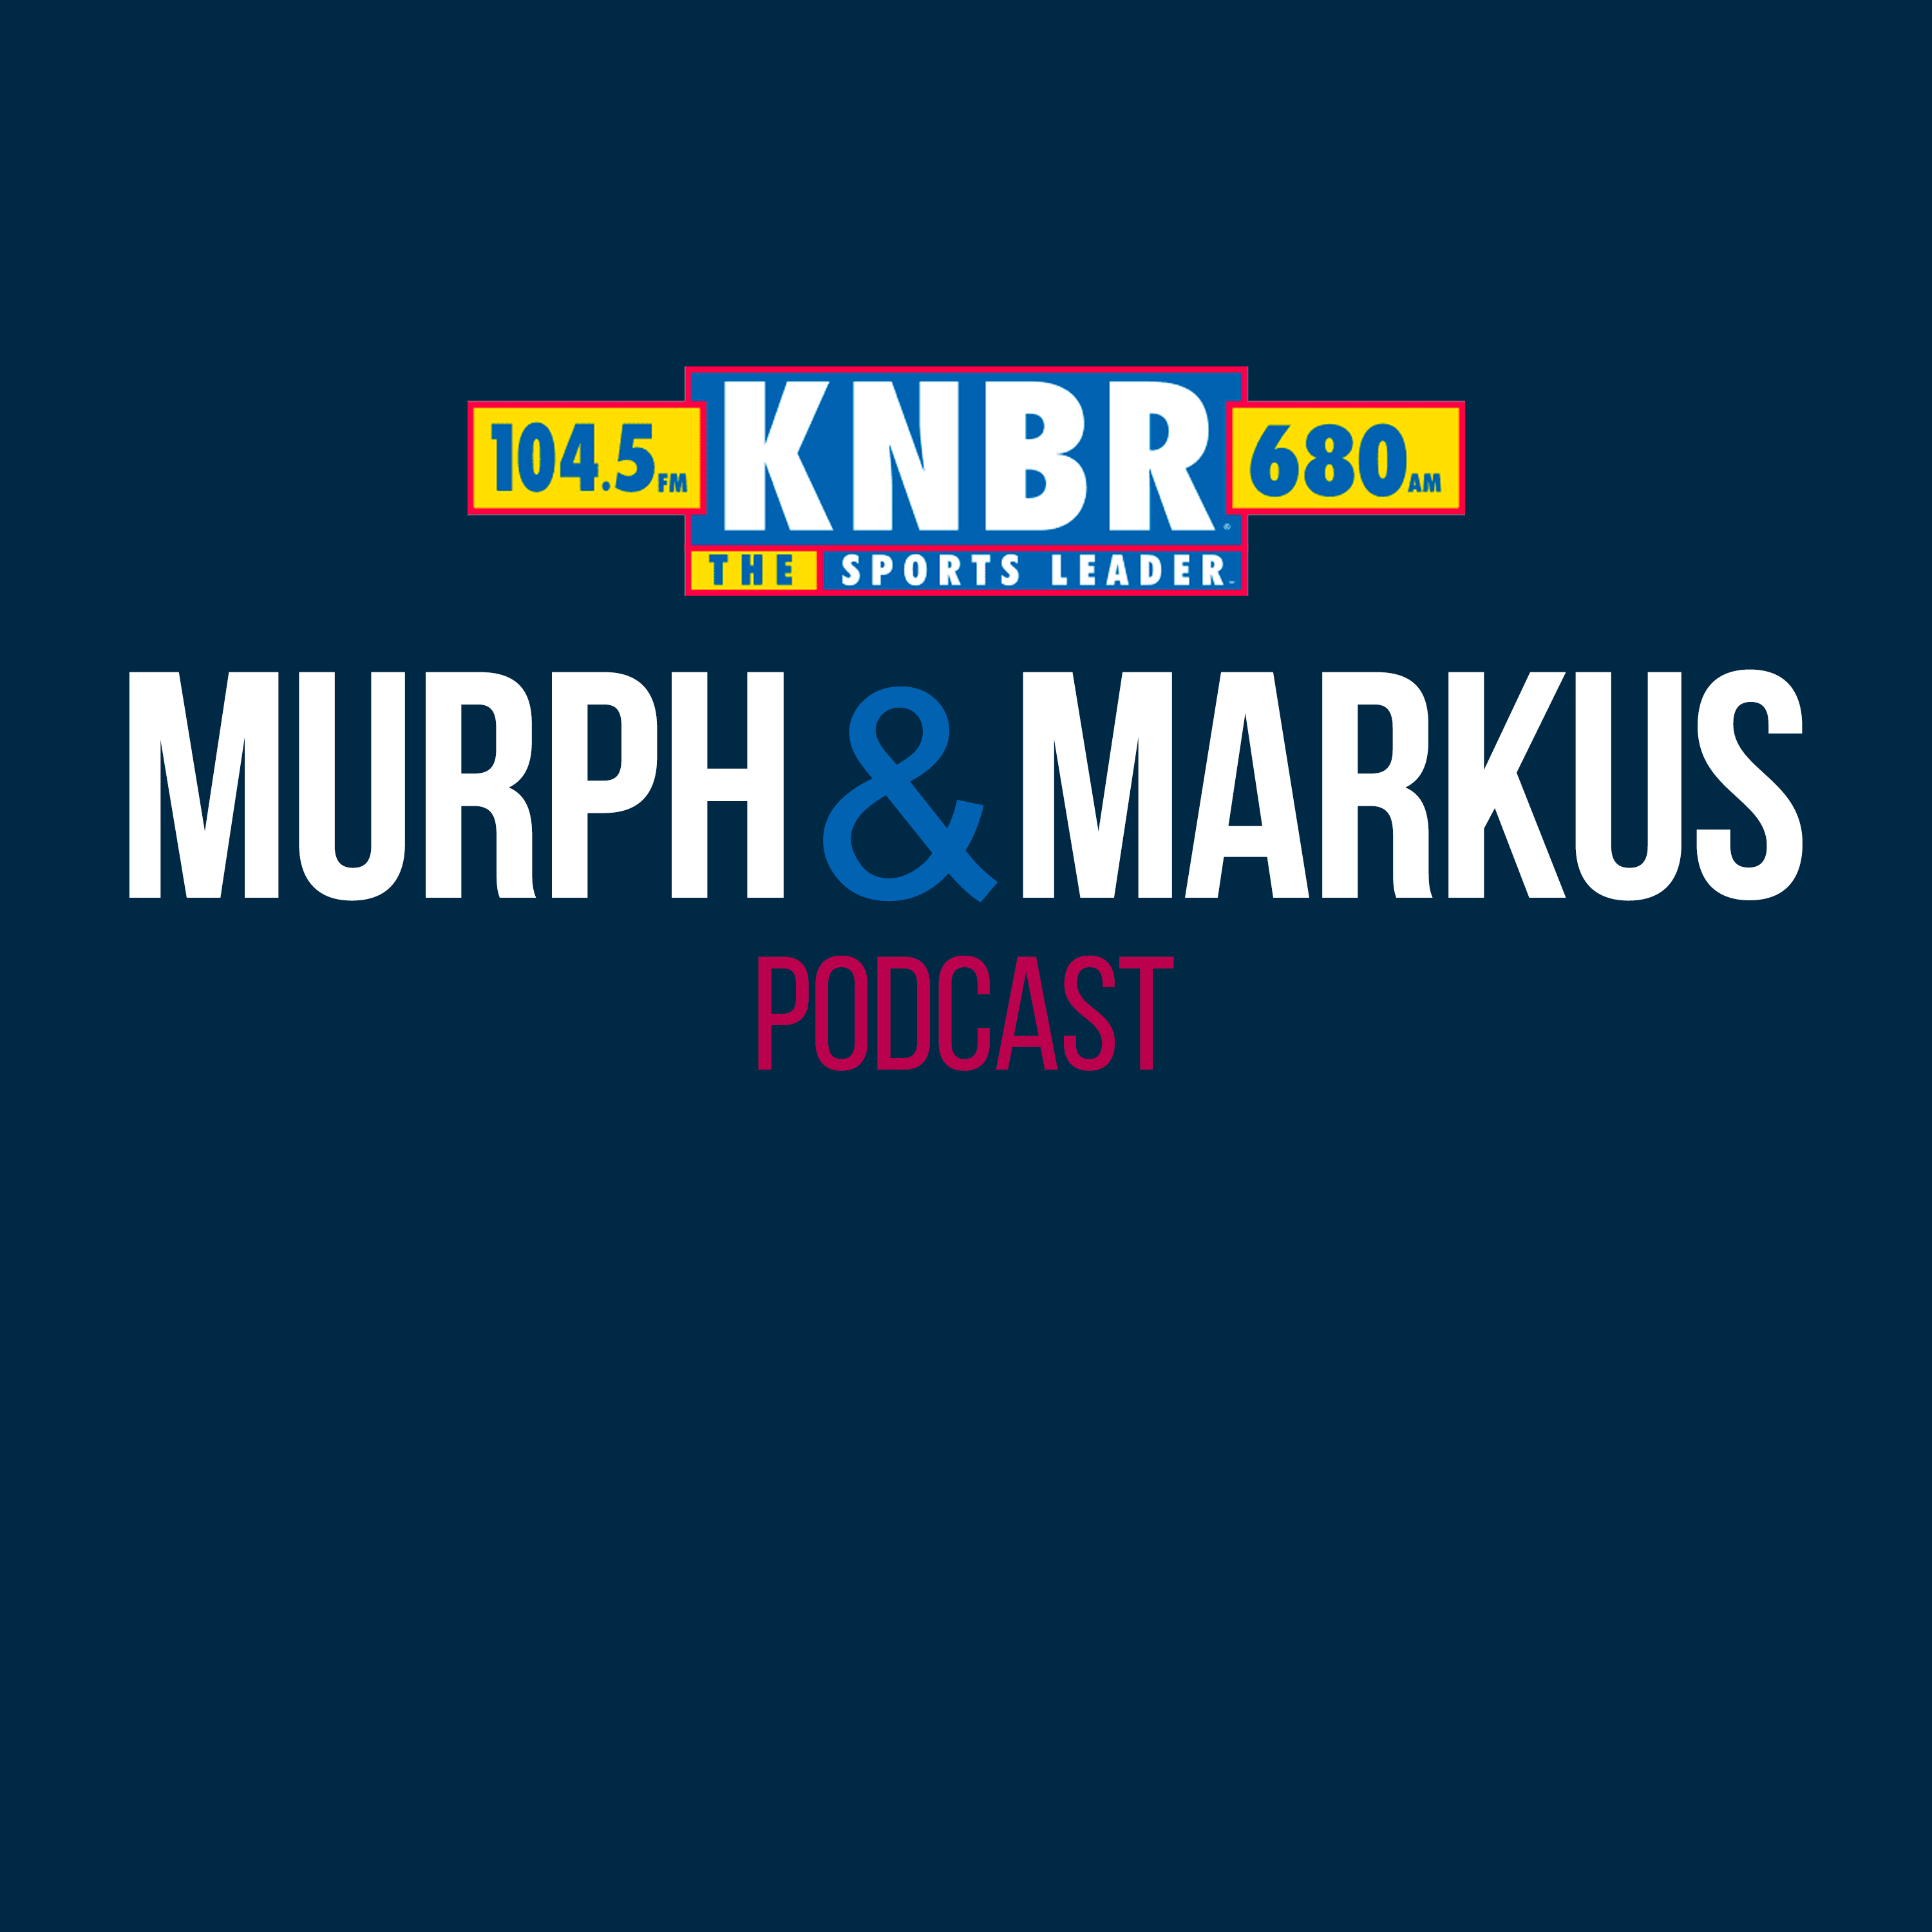 5/23 San Francisco Giants first baseman LaMonte Wade joined Murph and Markus to discuss the Giants comeback win in Pittsburgh